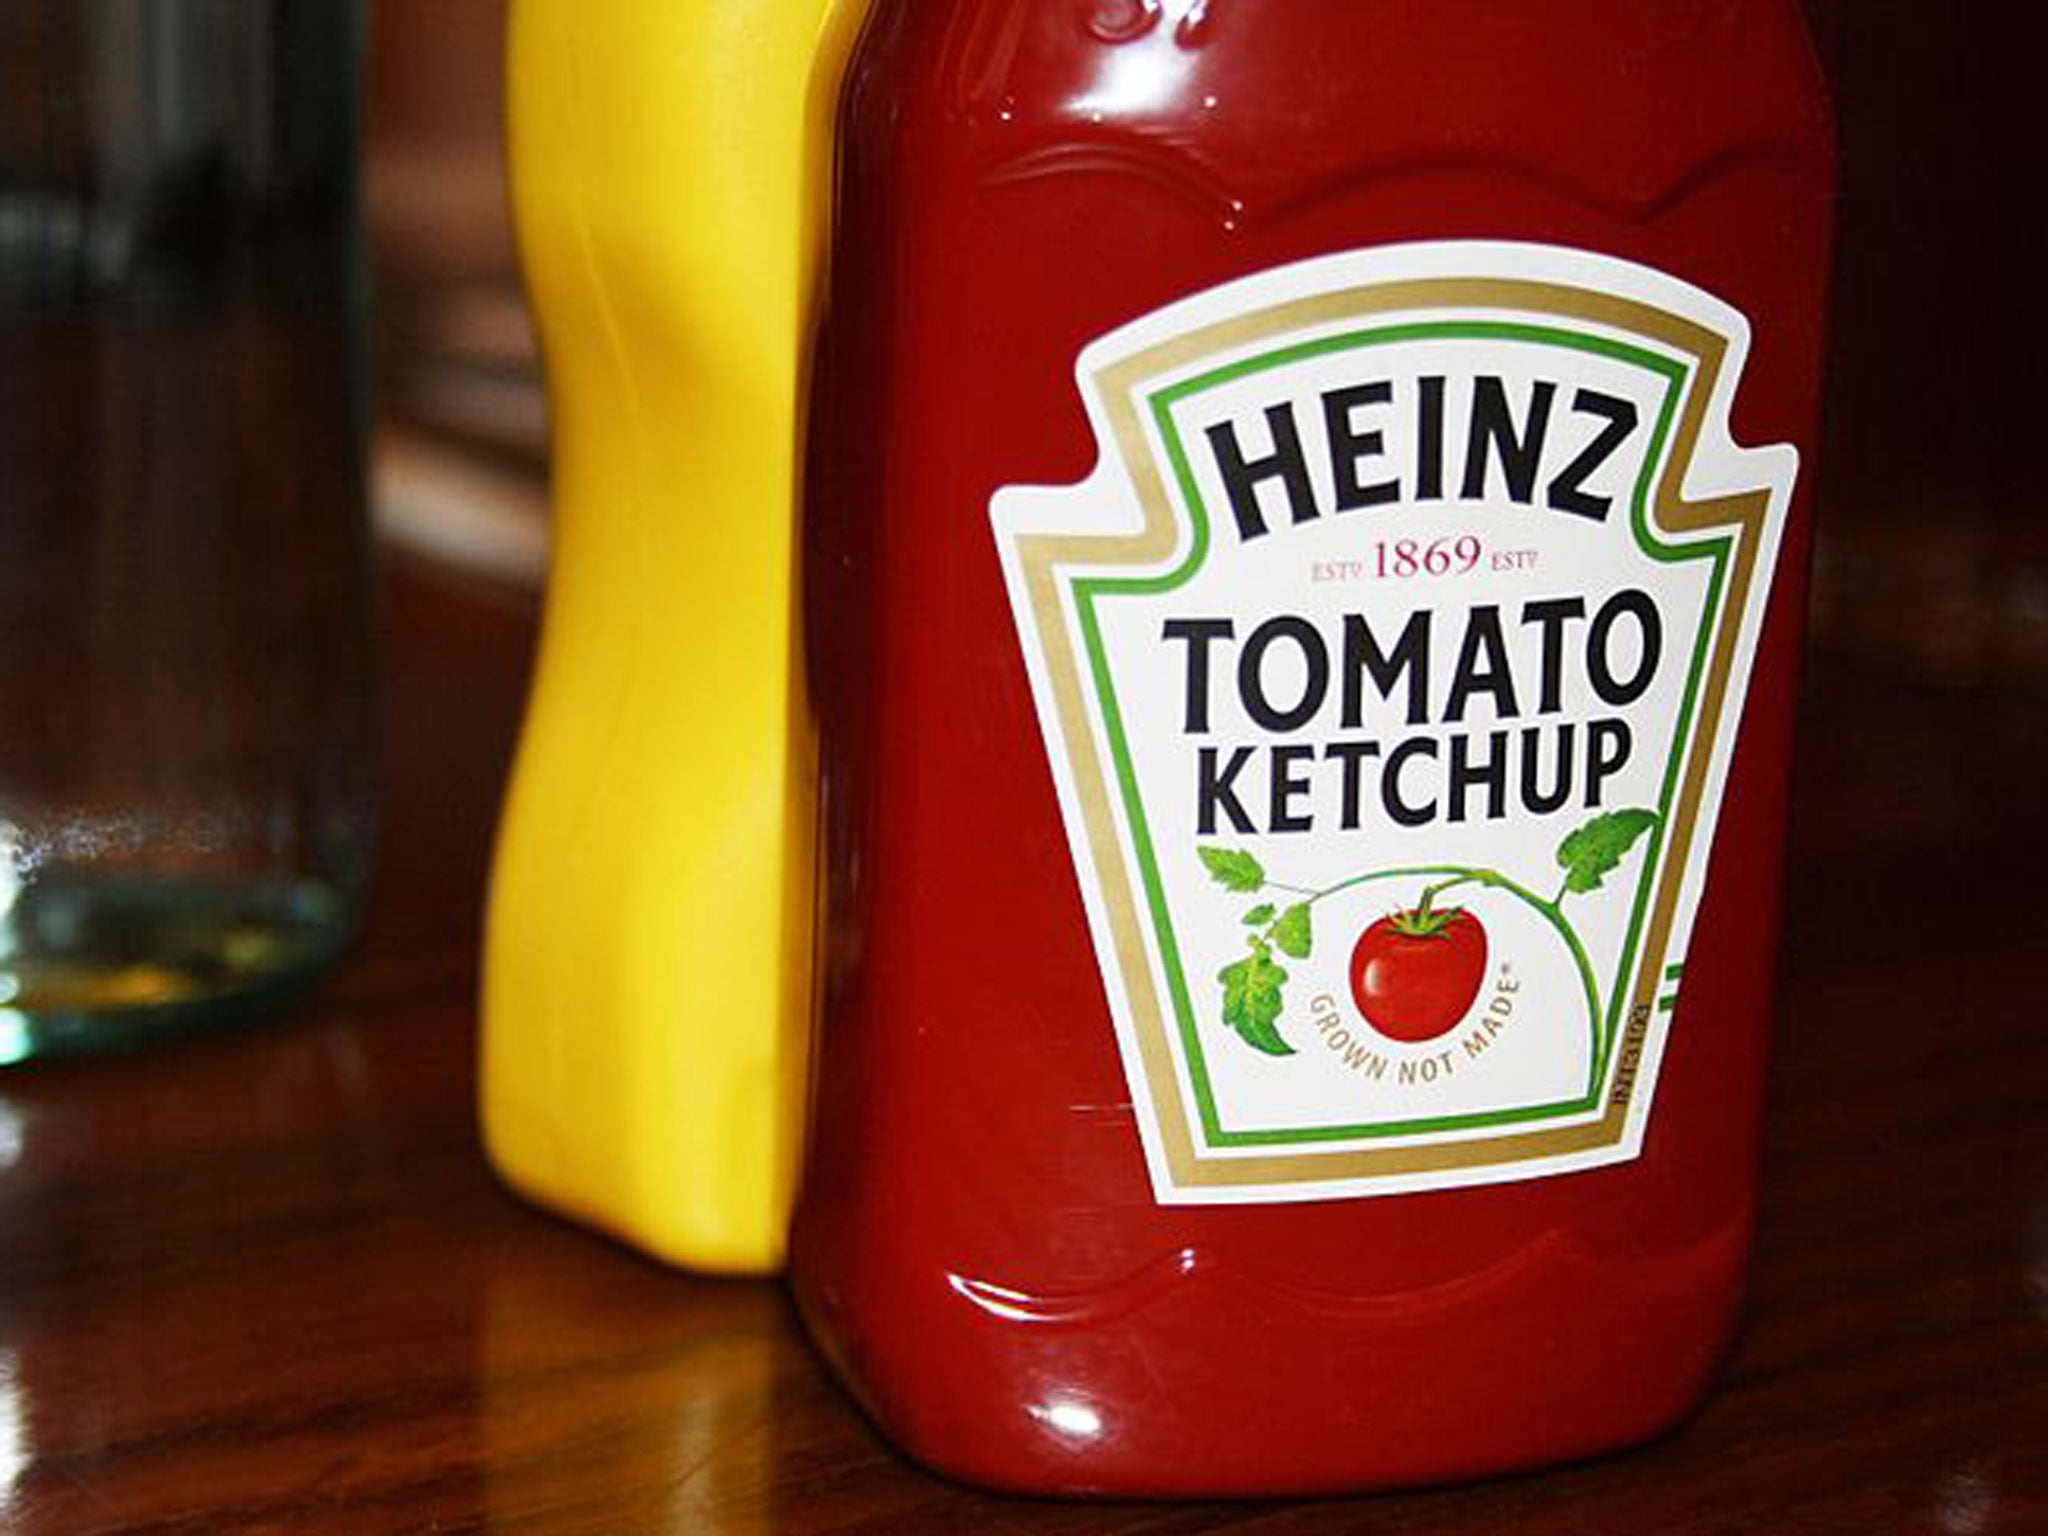 Heinz tomato ketchup cannot be called ketchup in Israel | The ...